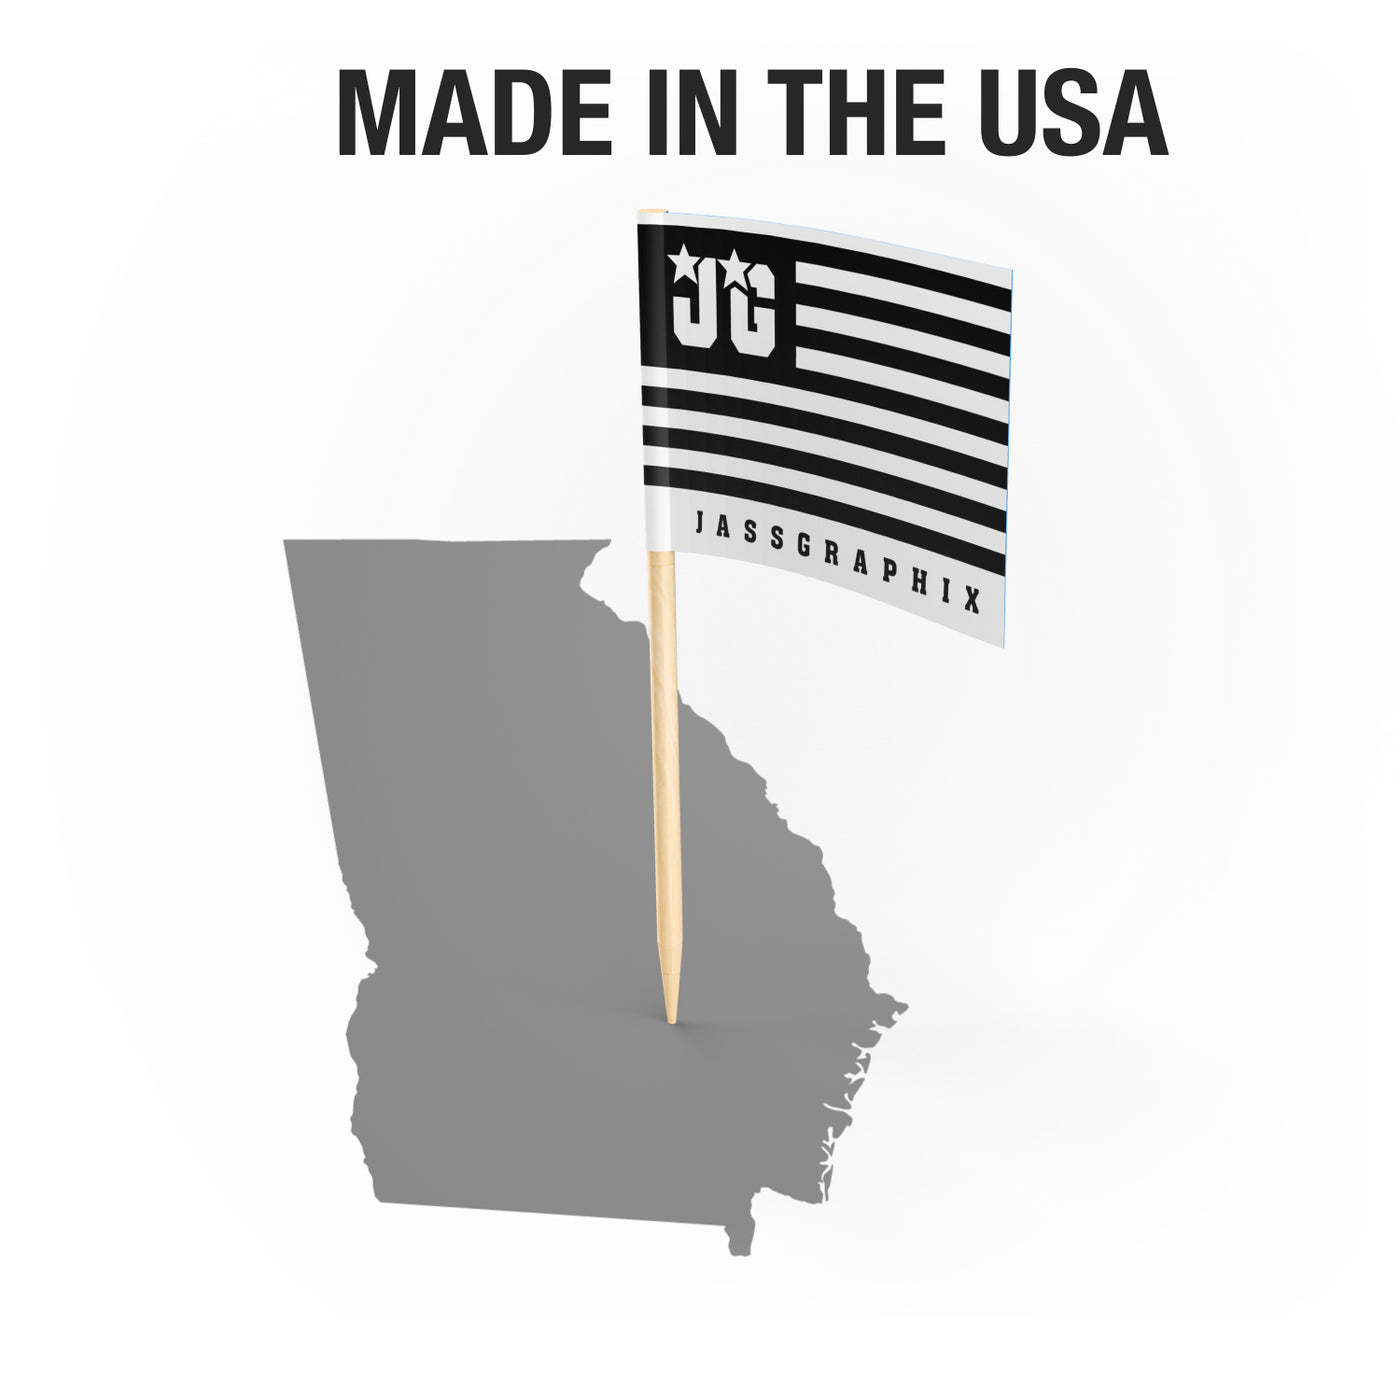 Made in the USA in our hometown of Eastman, GA.